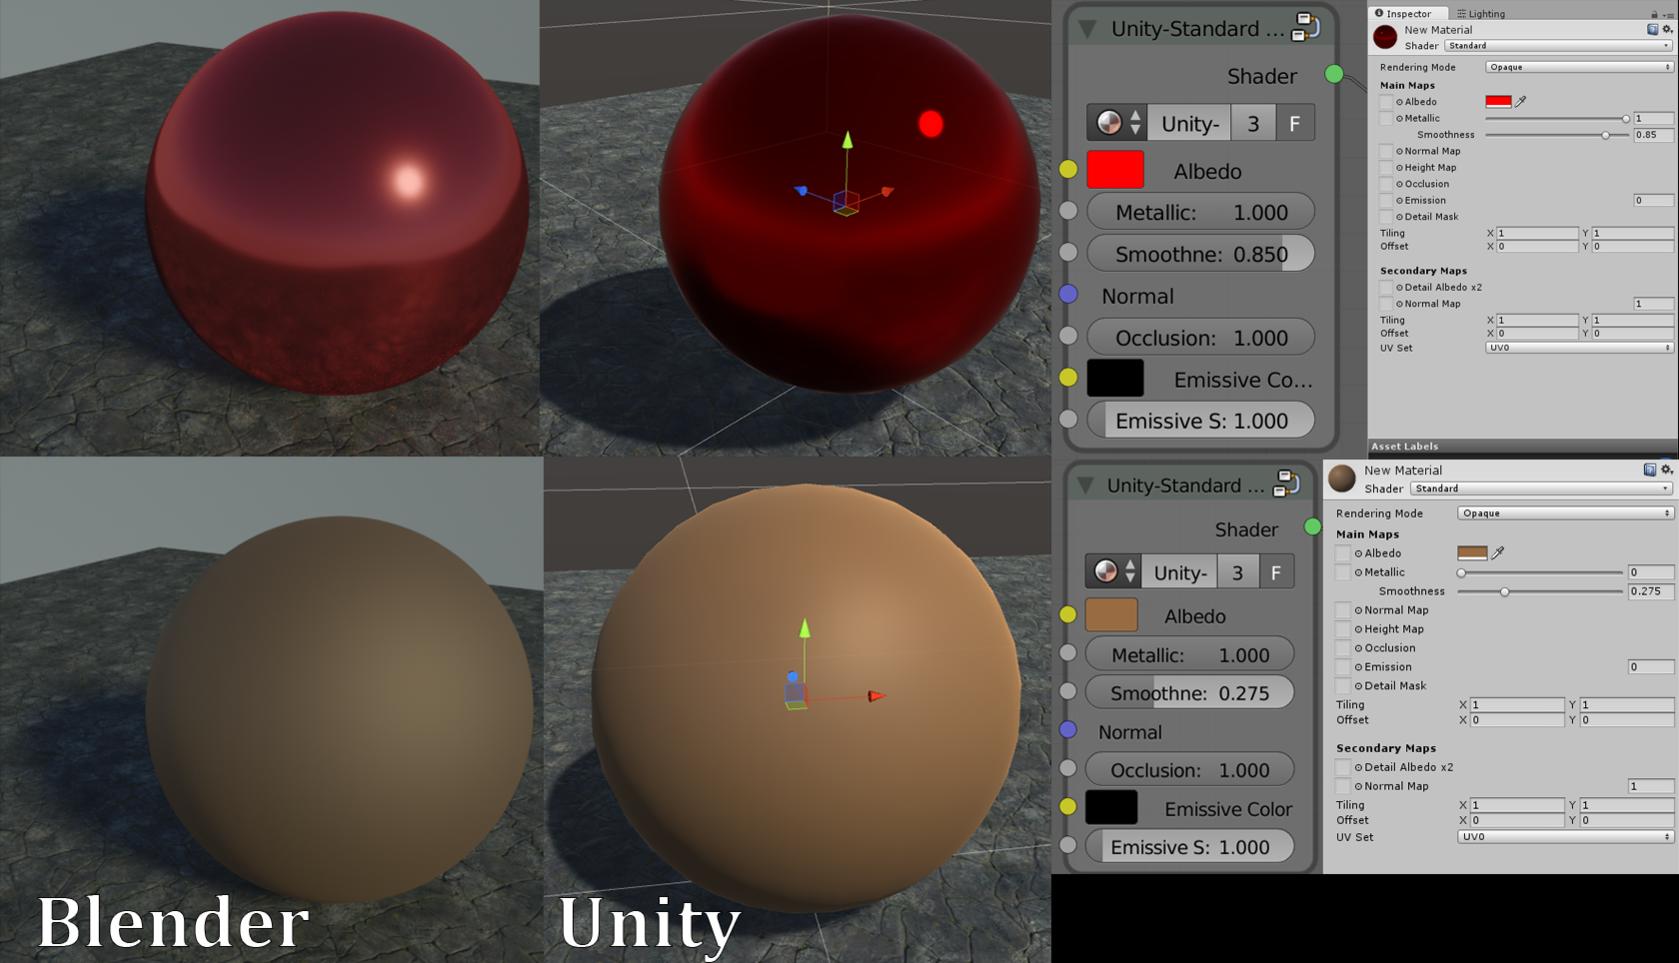 Shader Unity standard shader in blender cycles - Finished Projects - Blender Artists Community